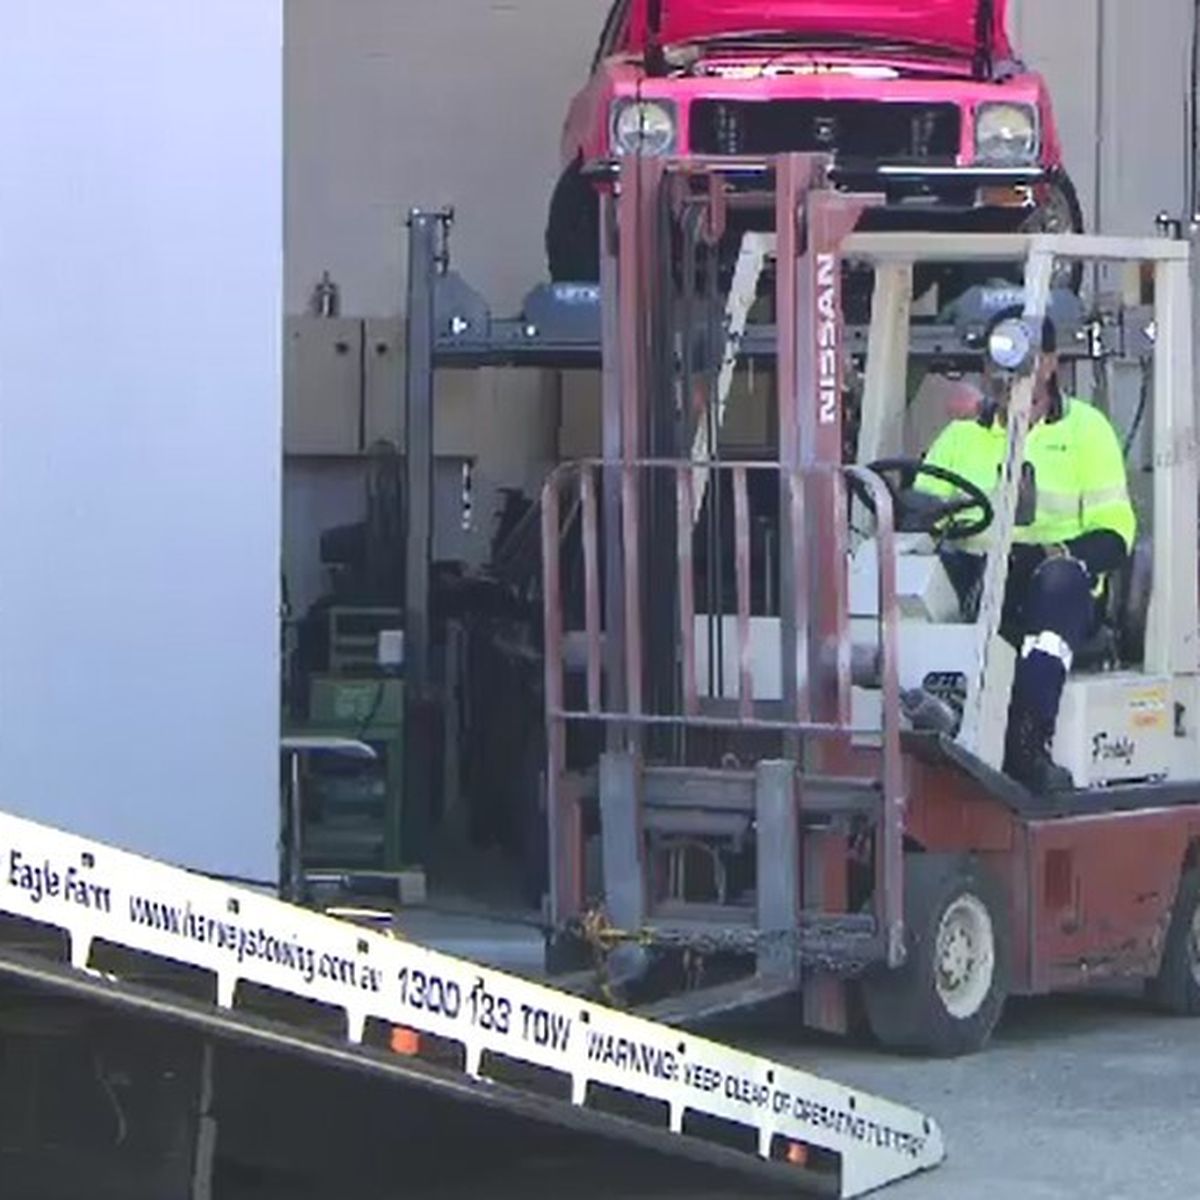 Forklift frenzy: Western Australian man charged after allegedly causing  $150,000 in damage, Western Australia